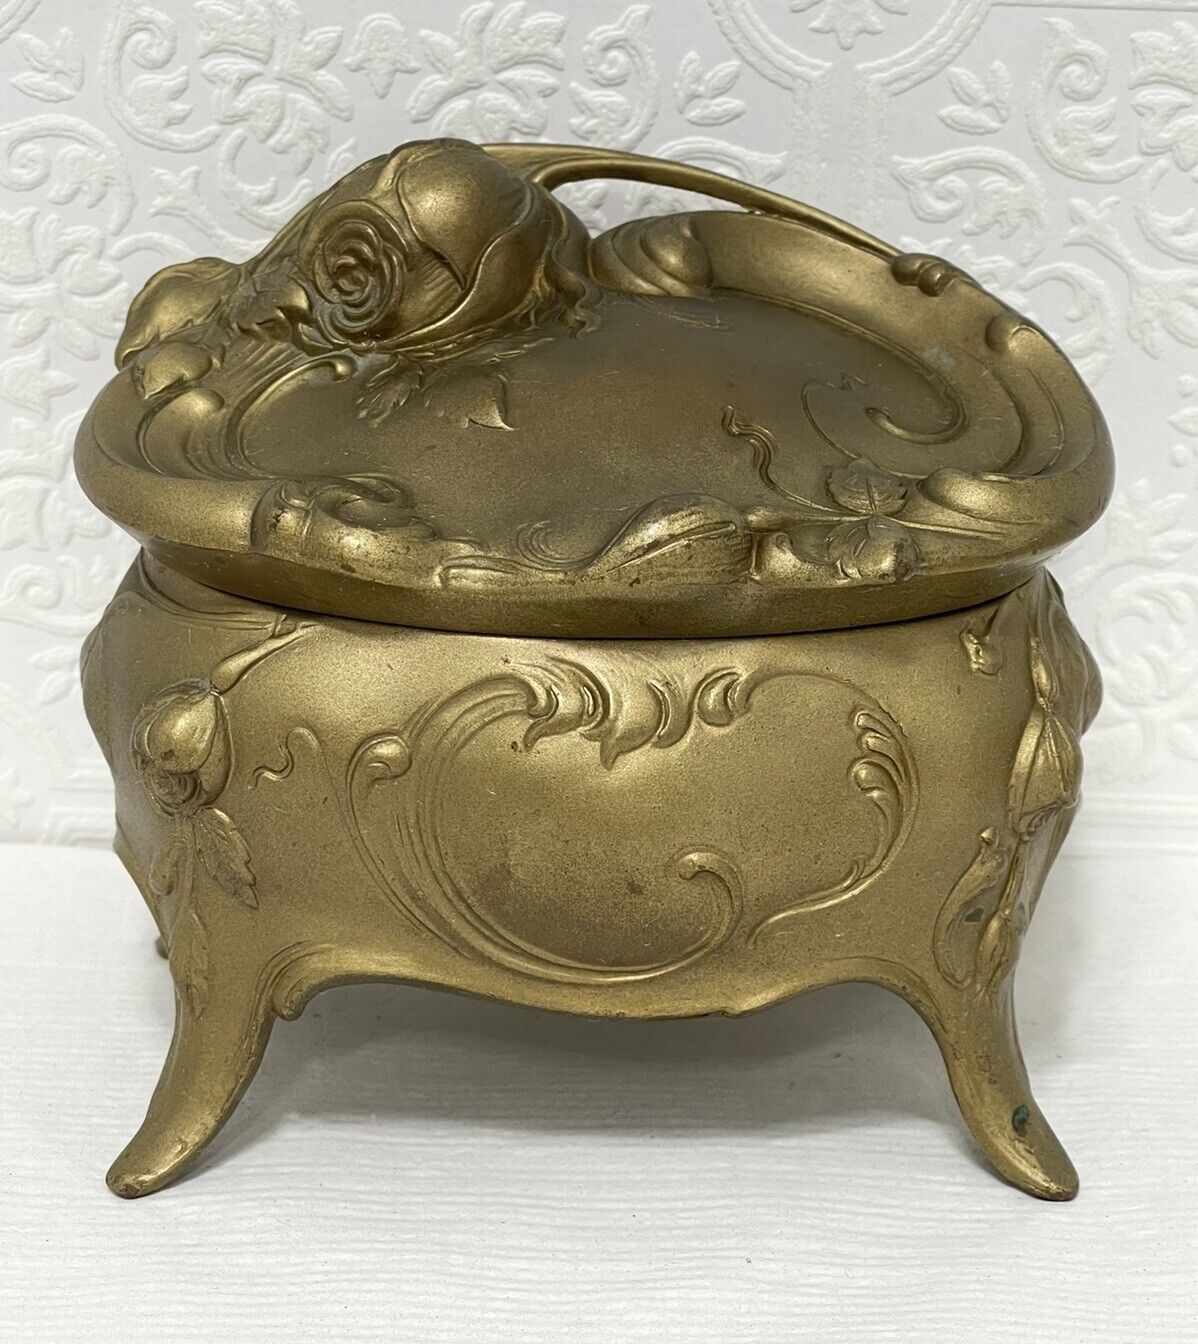 Antique Art Nouveau 1890-1900's Jewelry Box Hinged Lid Spelter Bronze Overlay